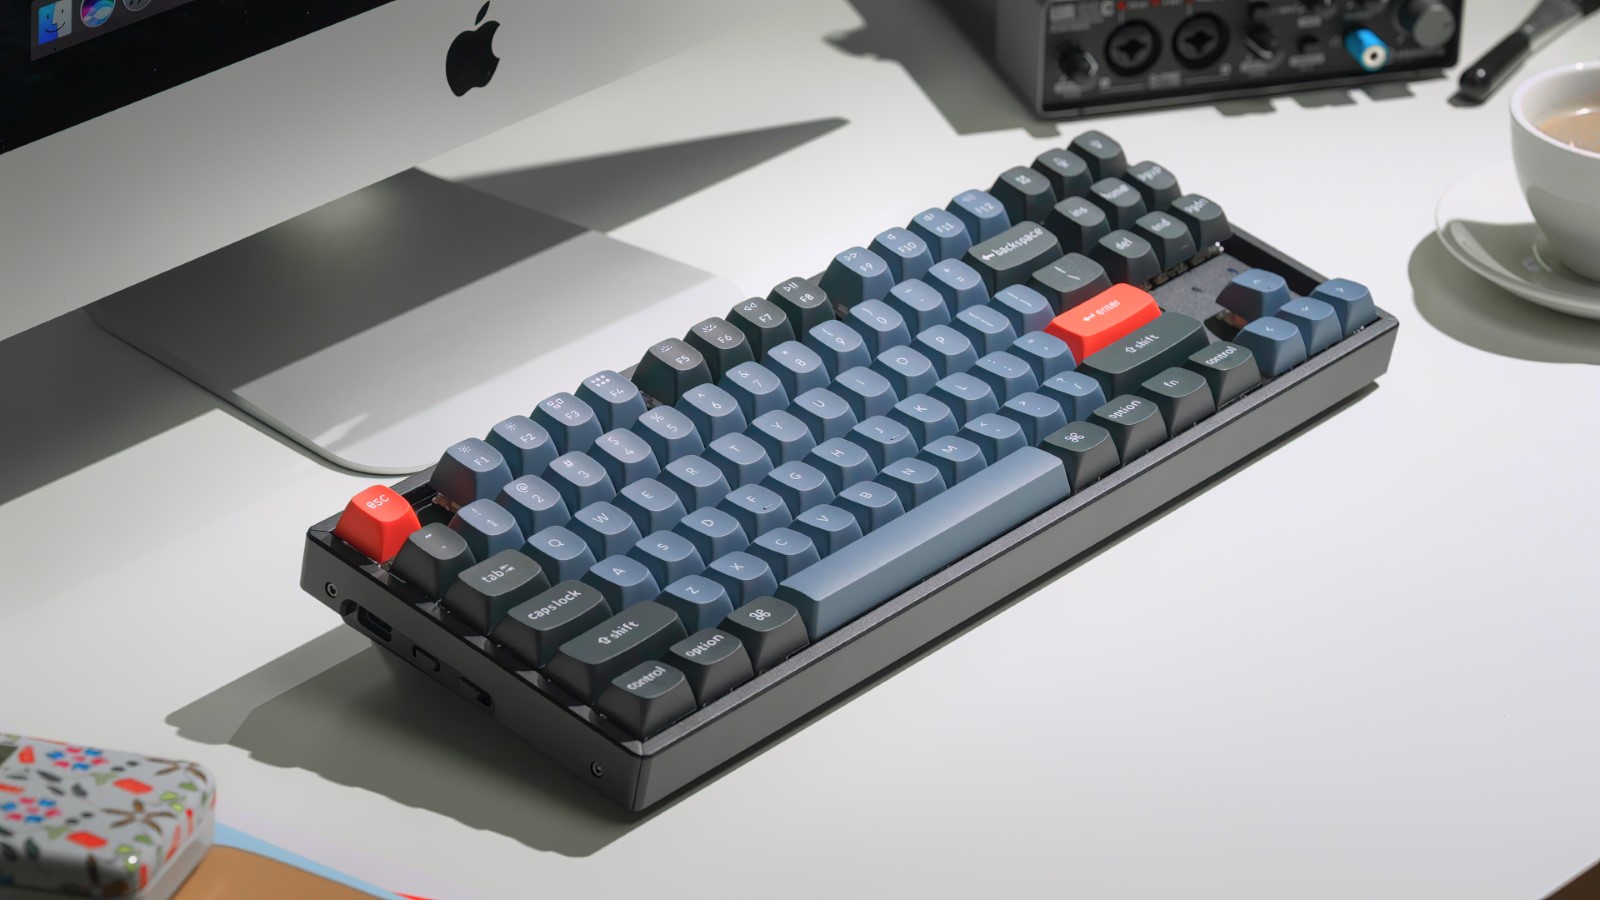 Keychron K8 Pro mechanical keyboard review: An affordable trip